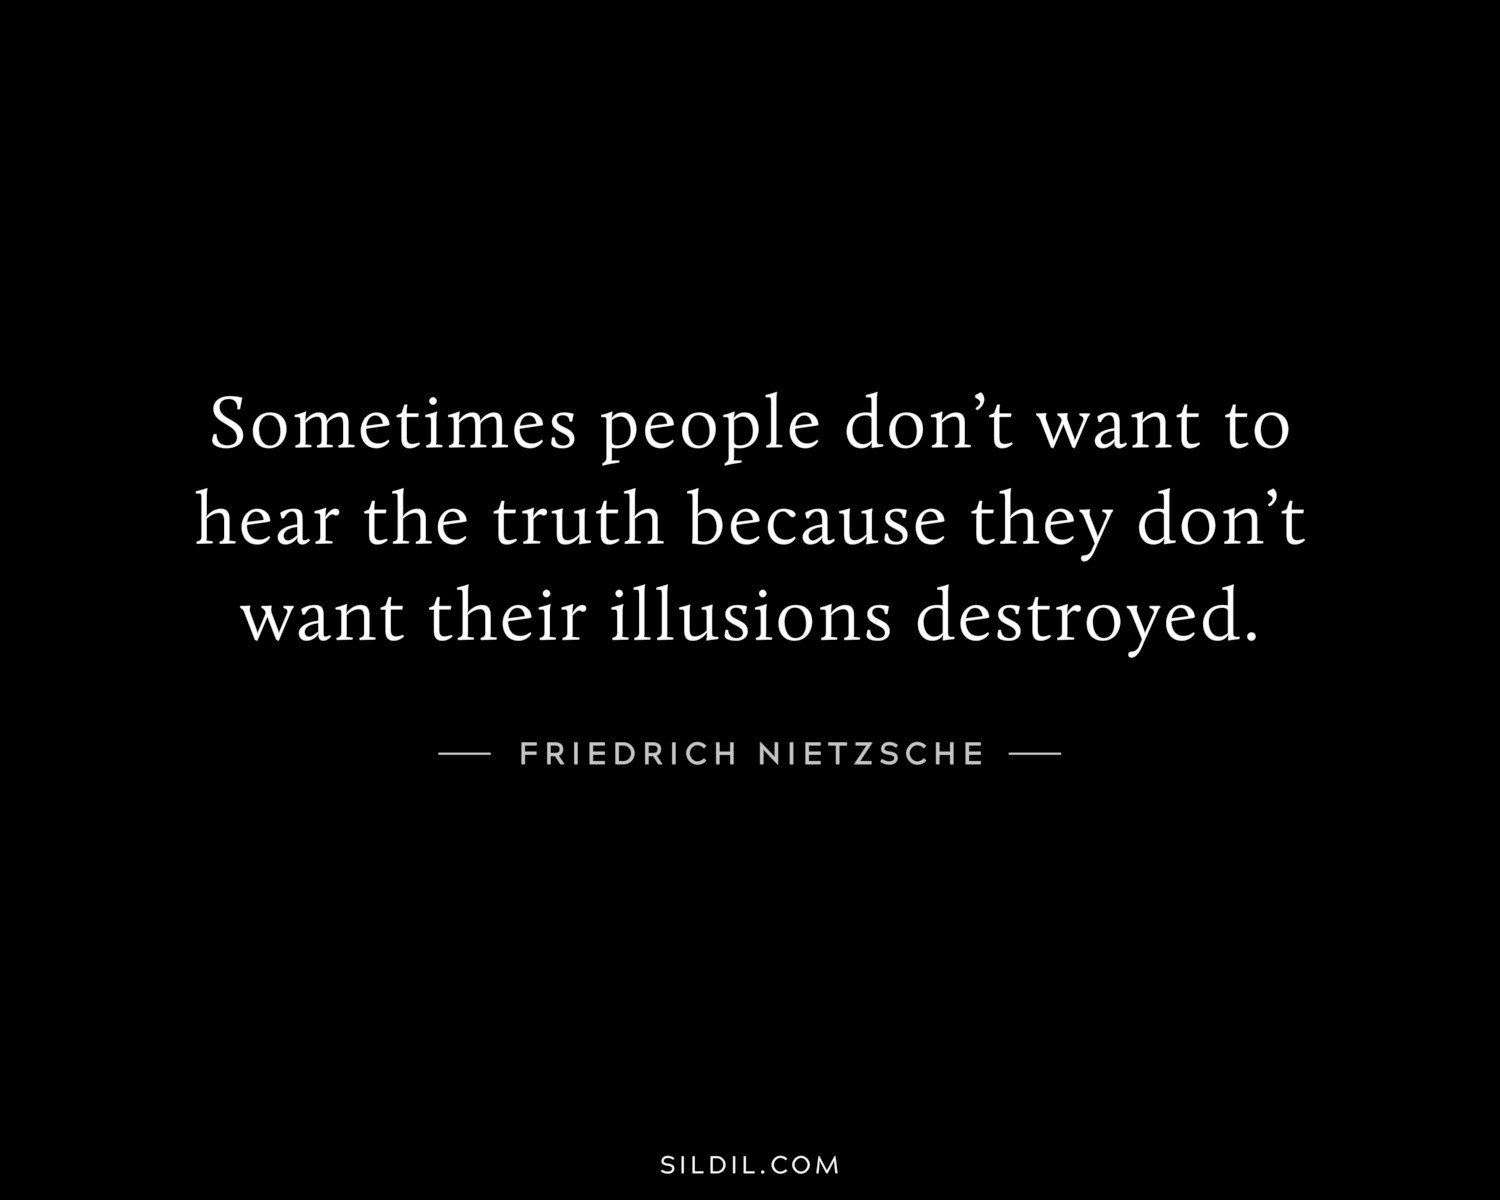 Sometimes people don’t want to hear the truth because they don’t want their illusions destroyed.